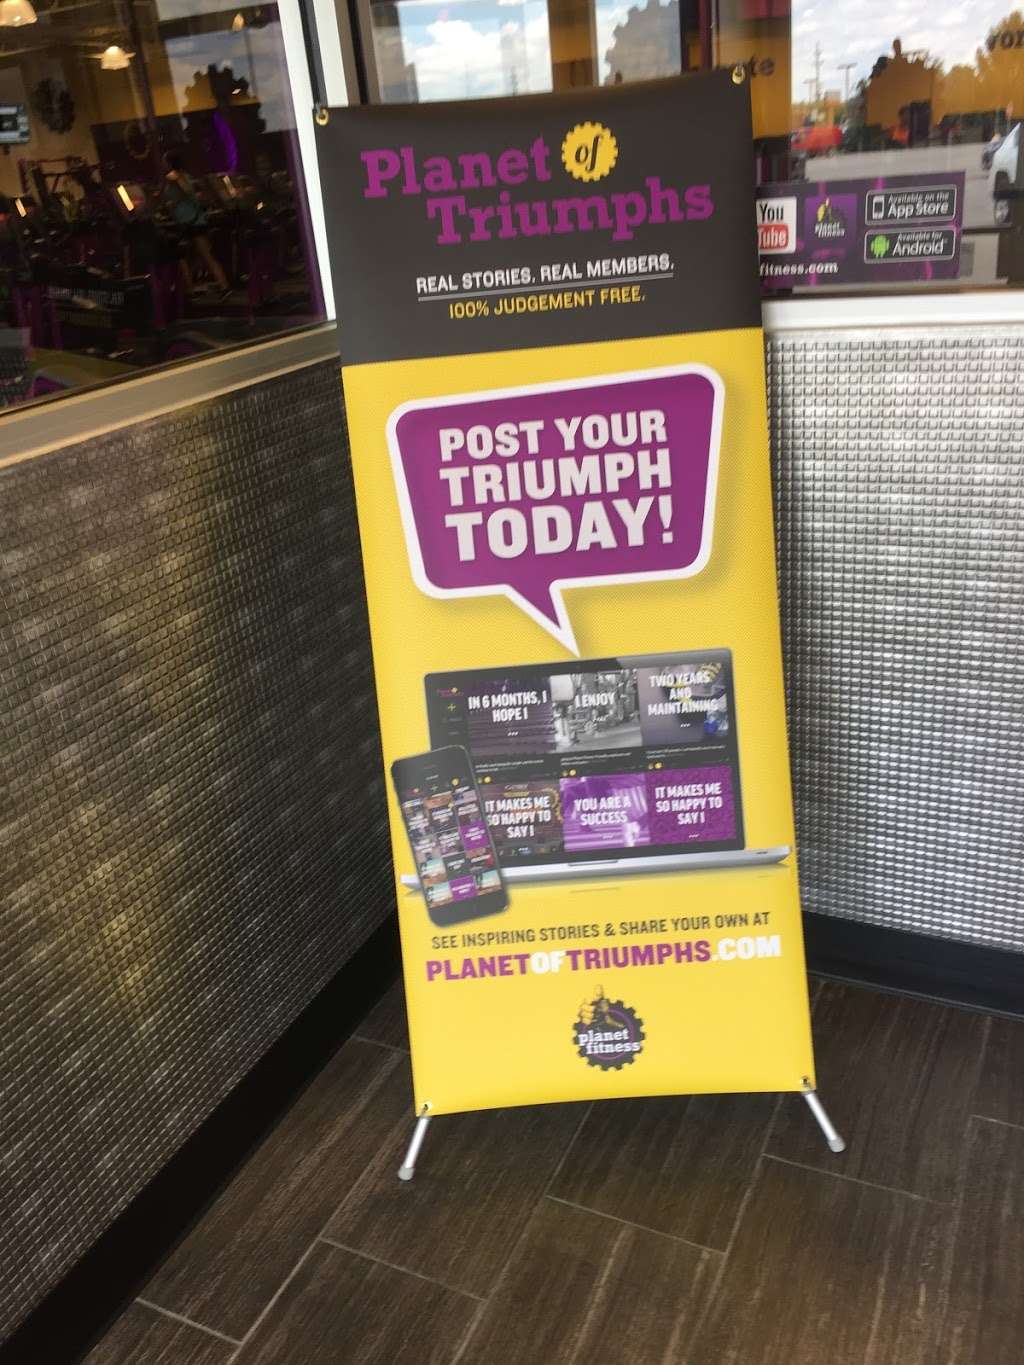 Planet Fitness | 2539 E State St #44, Shelbyville, IN 46176, USA | Phone: (317) 401-8484